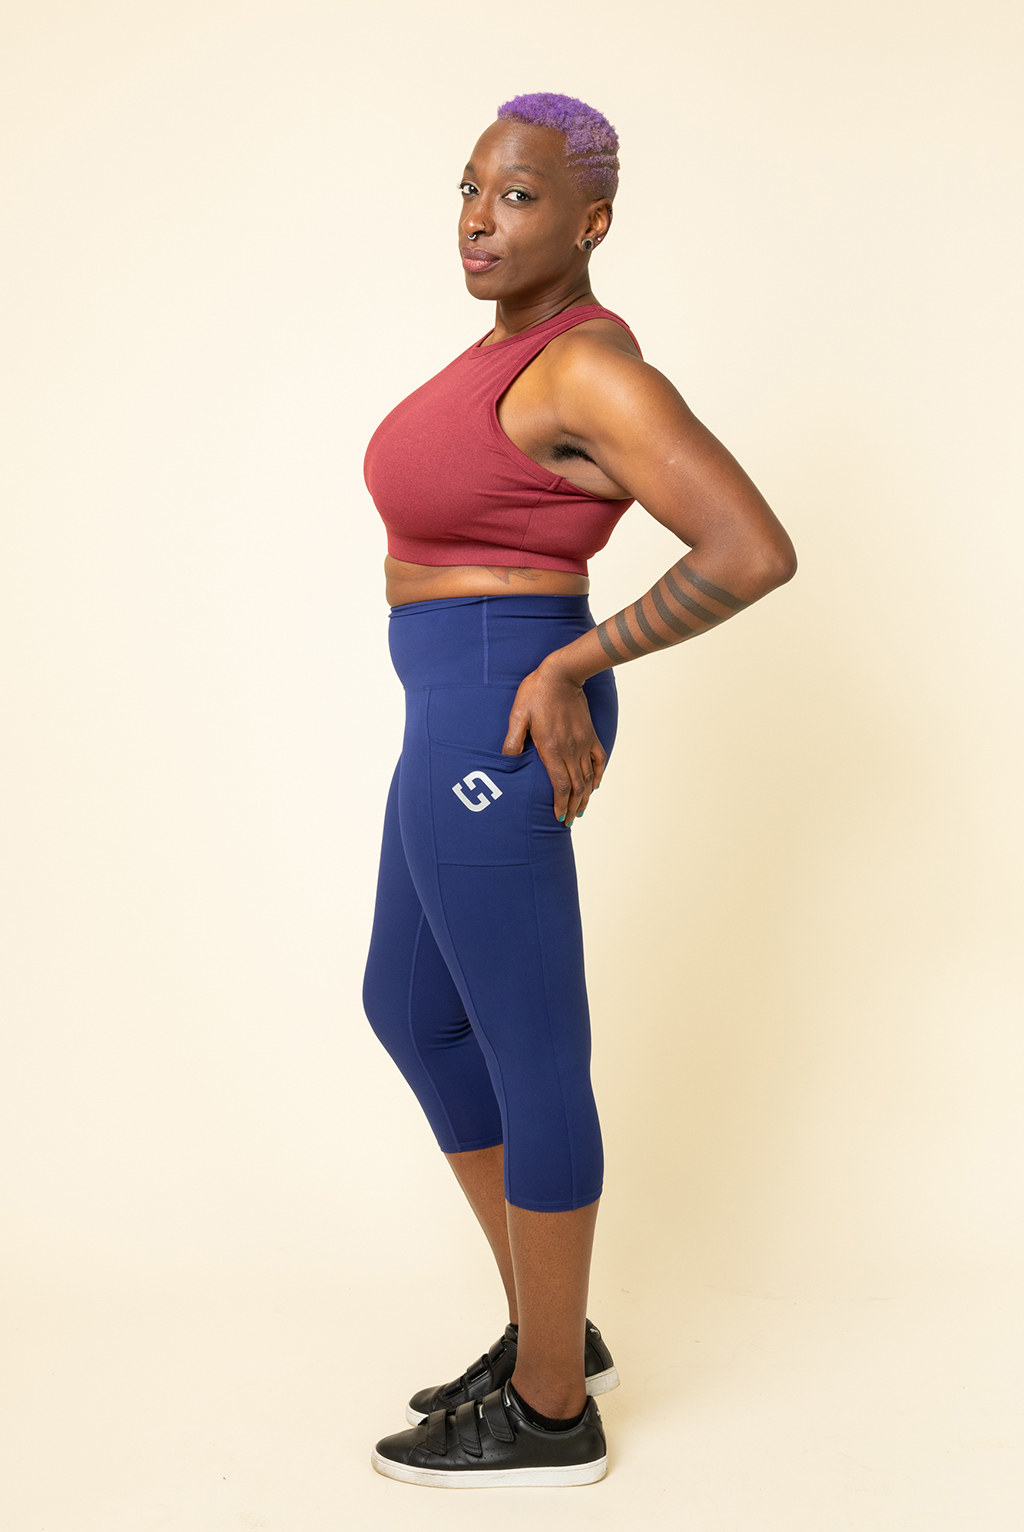 Model wears dark blue capris with a red crop top and black sneakers